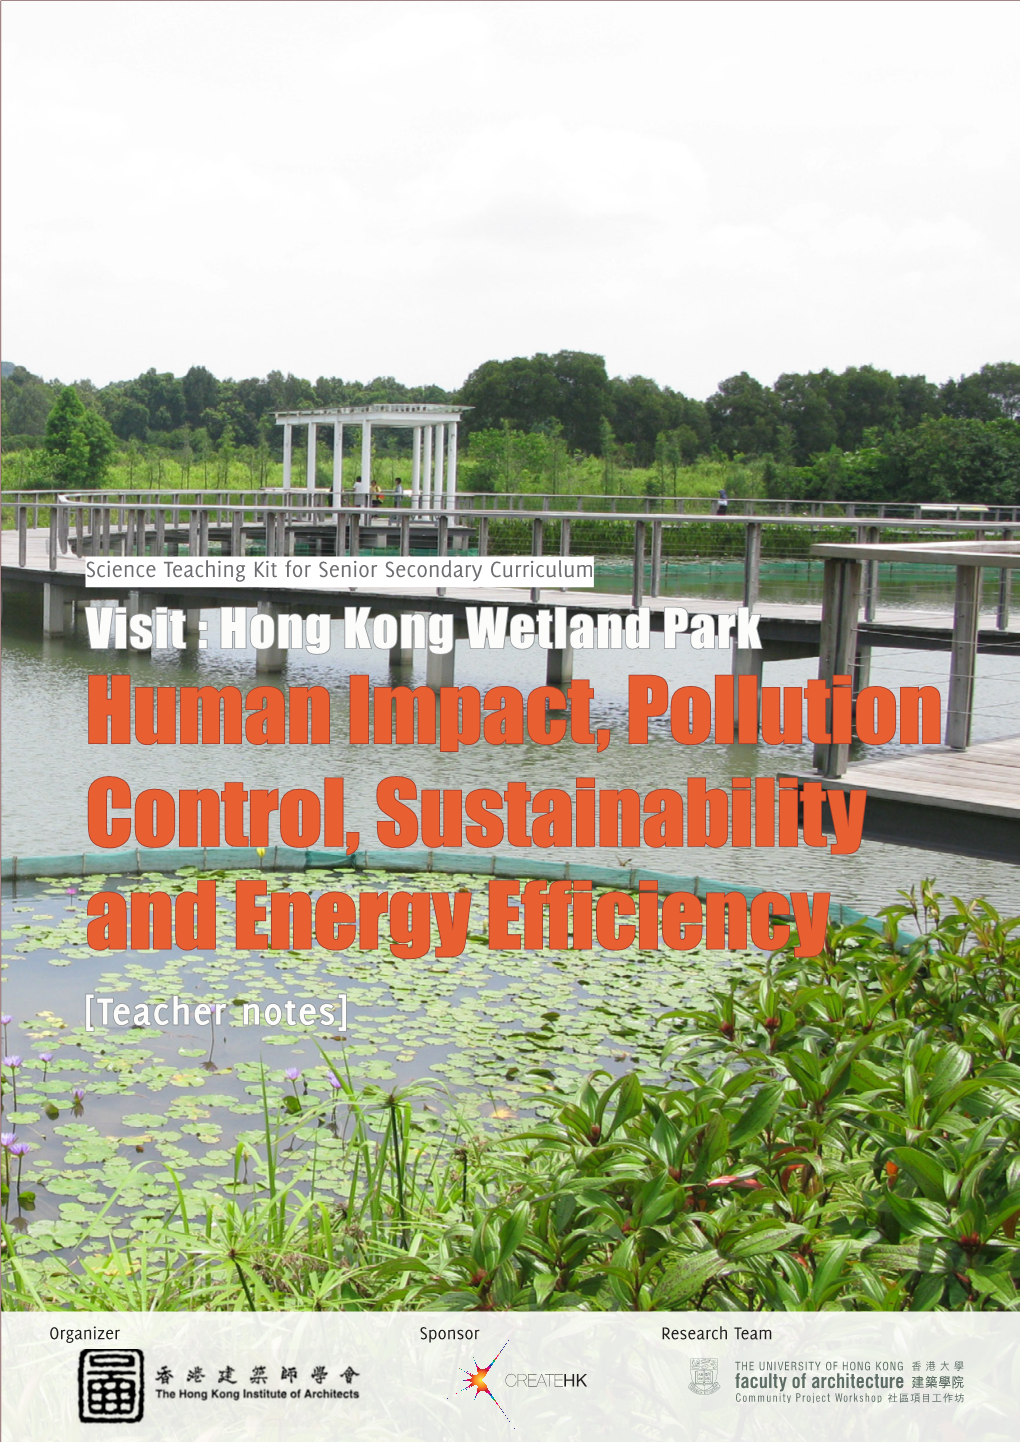 Human Impact, Pollution Control, Sustainability and Energy Efficiency [Teacher Notes]